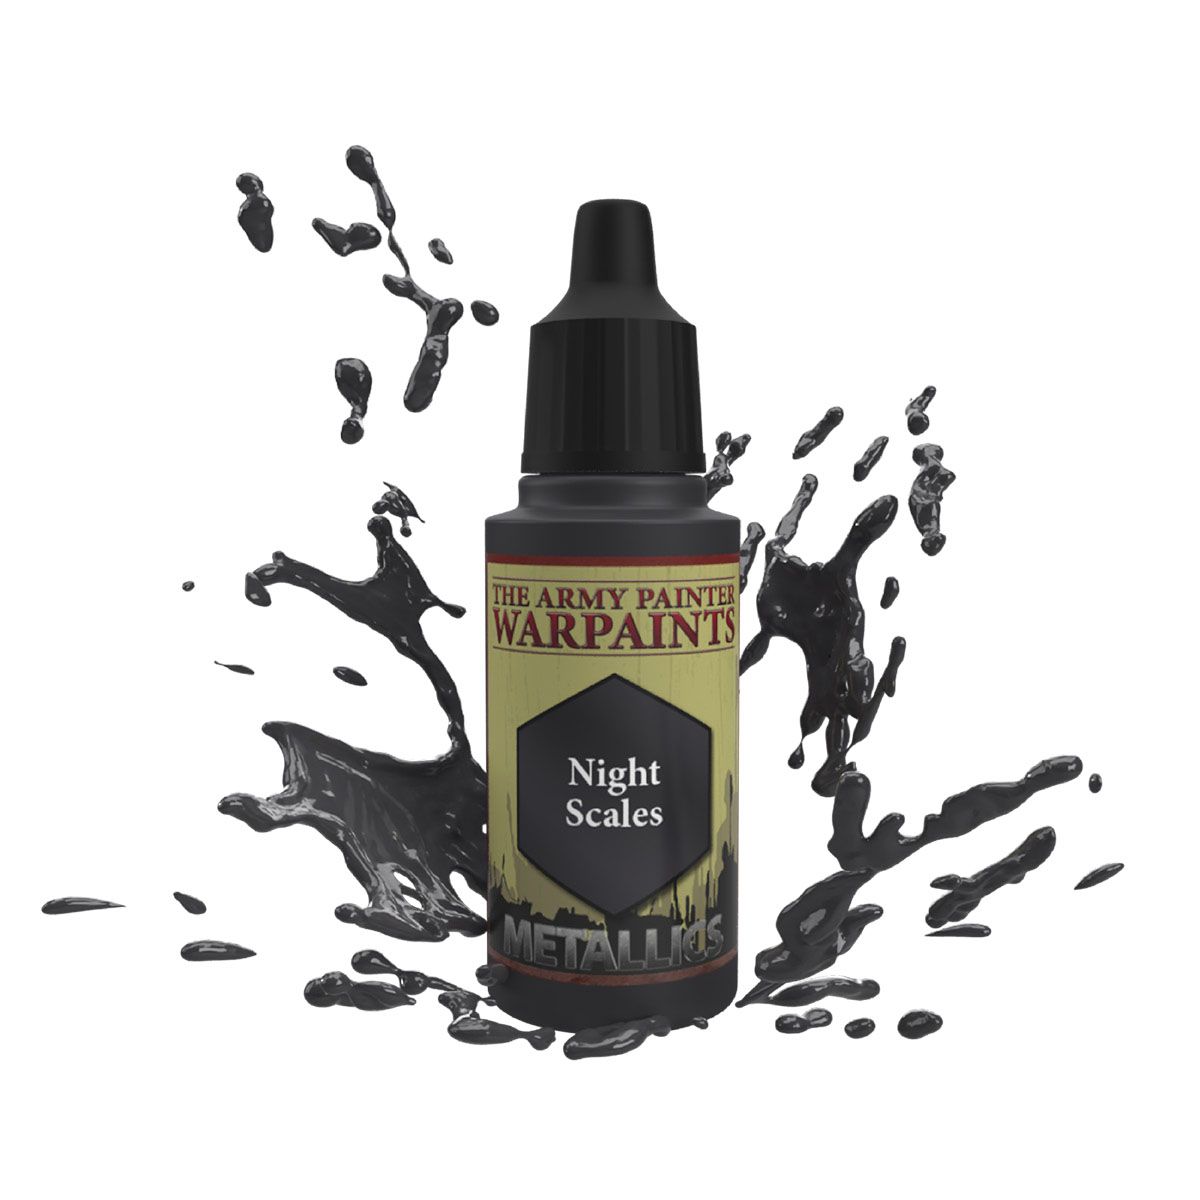 The Army Painter - Warpaints Metallics: Night Scales (18ml/0.6oz)